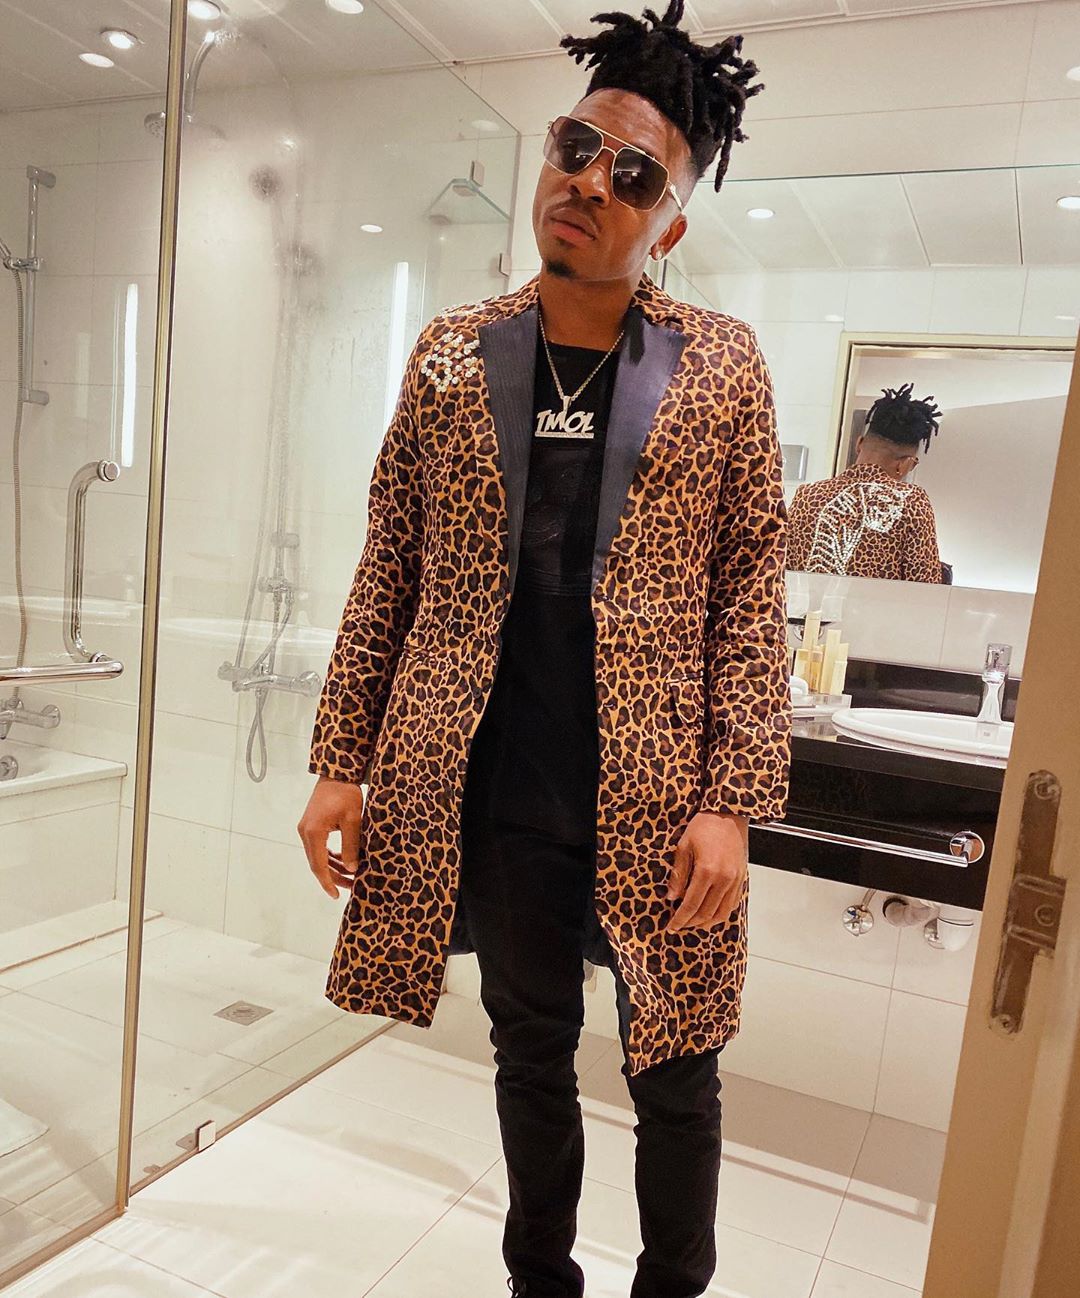 Mayorkun teases fans on "Holy Father" Video